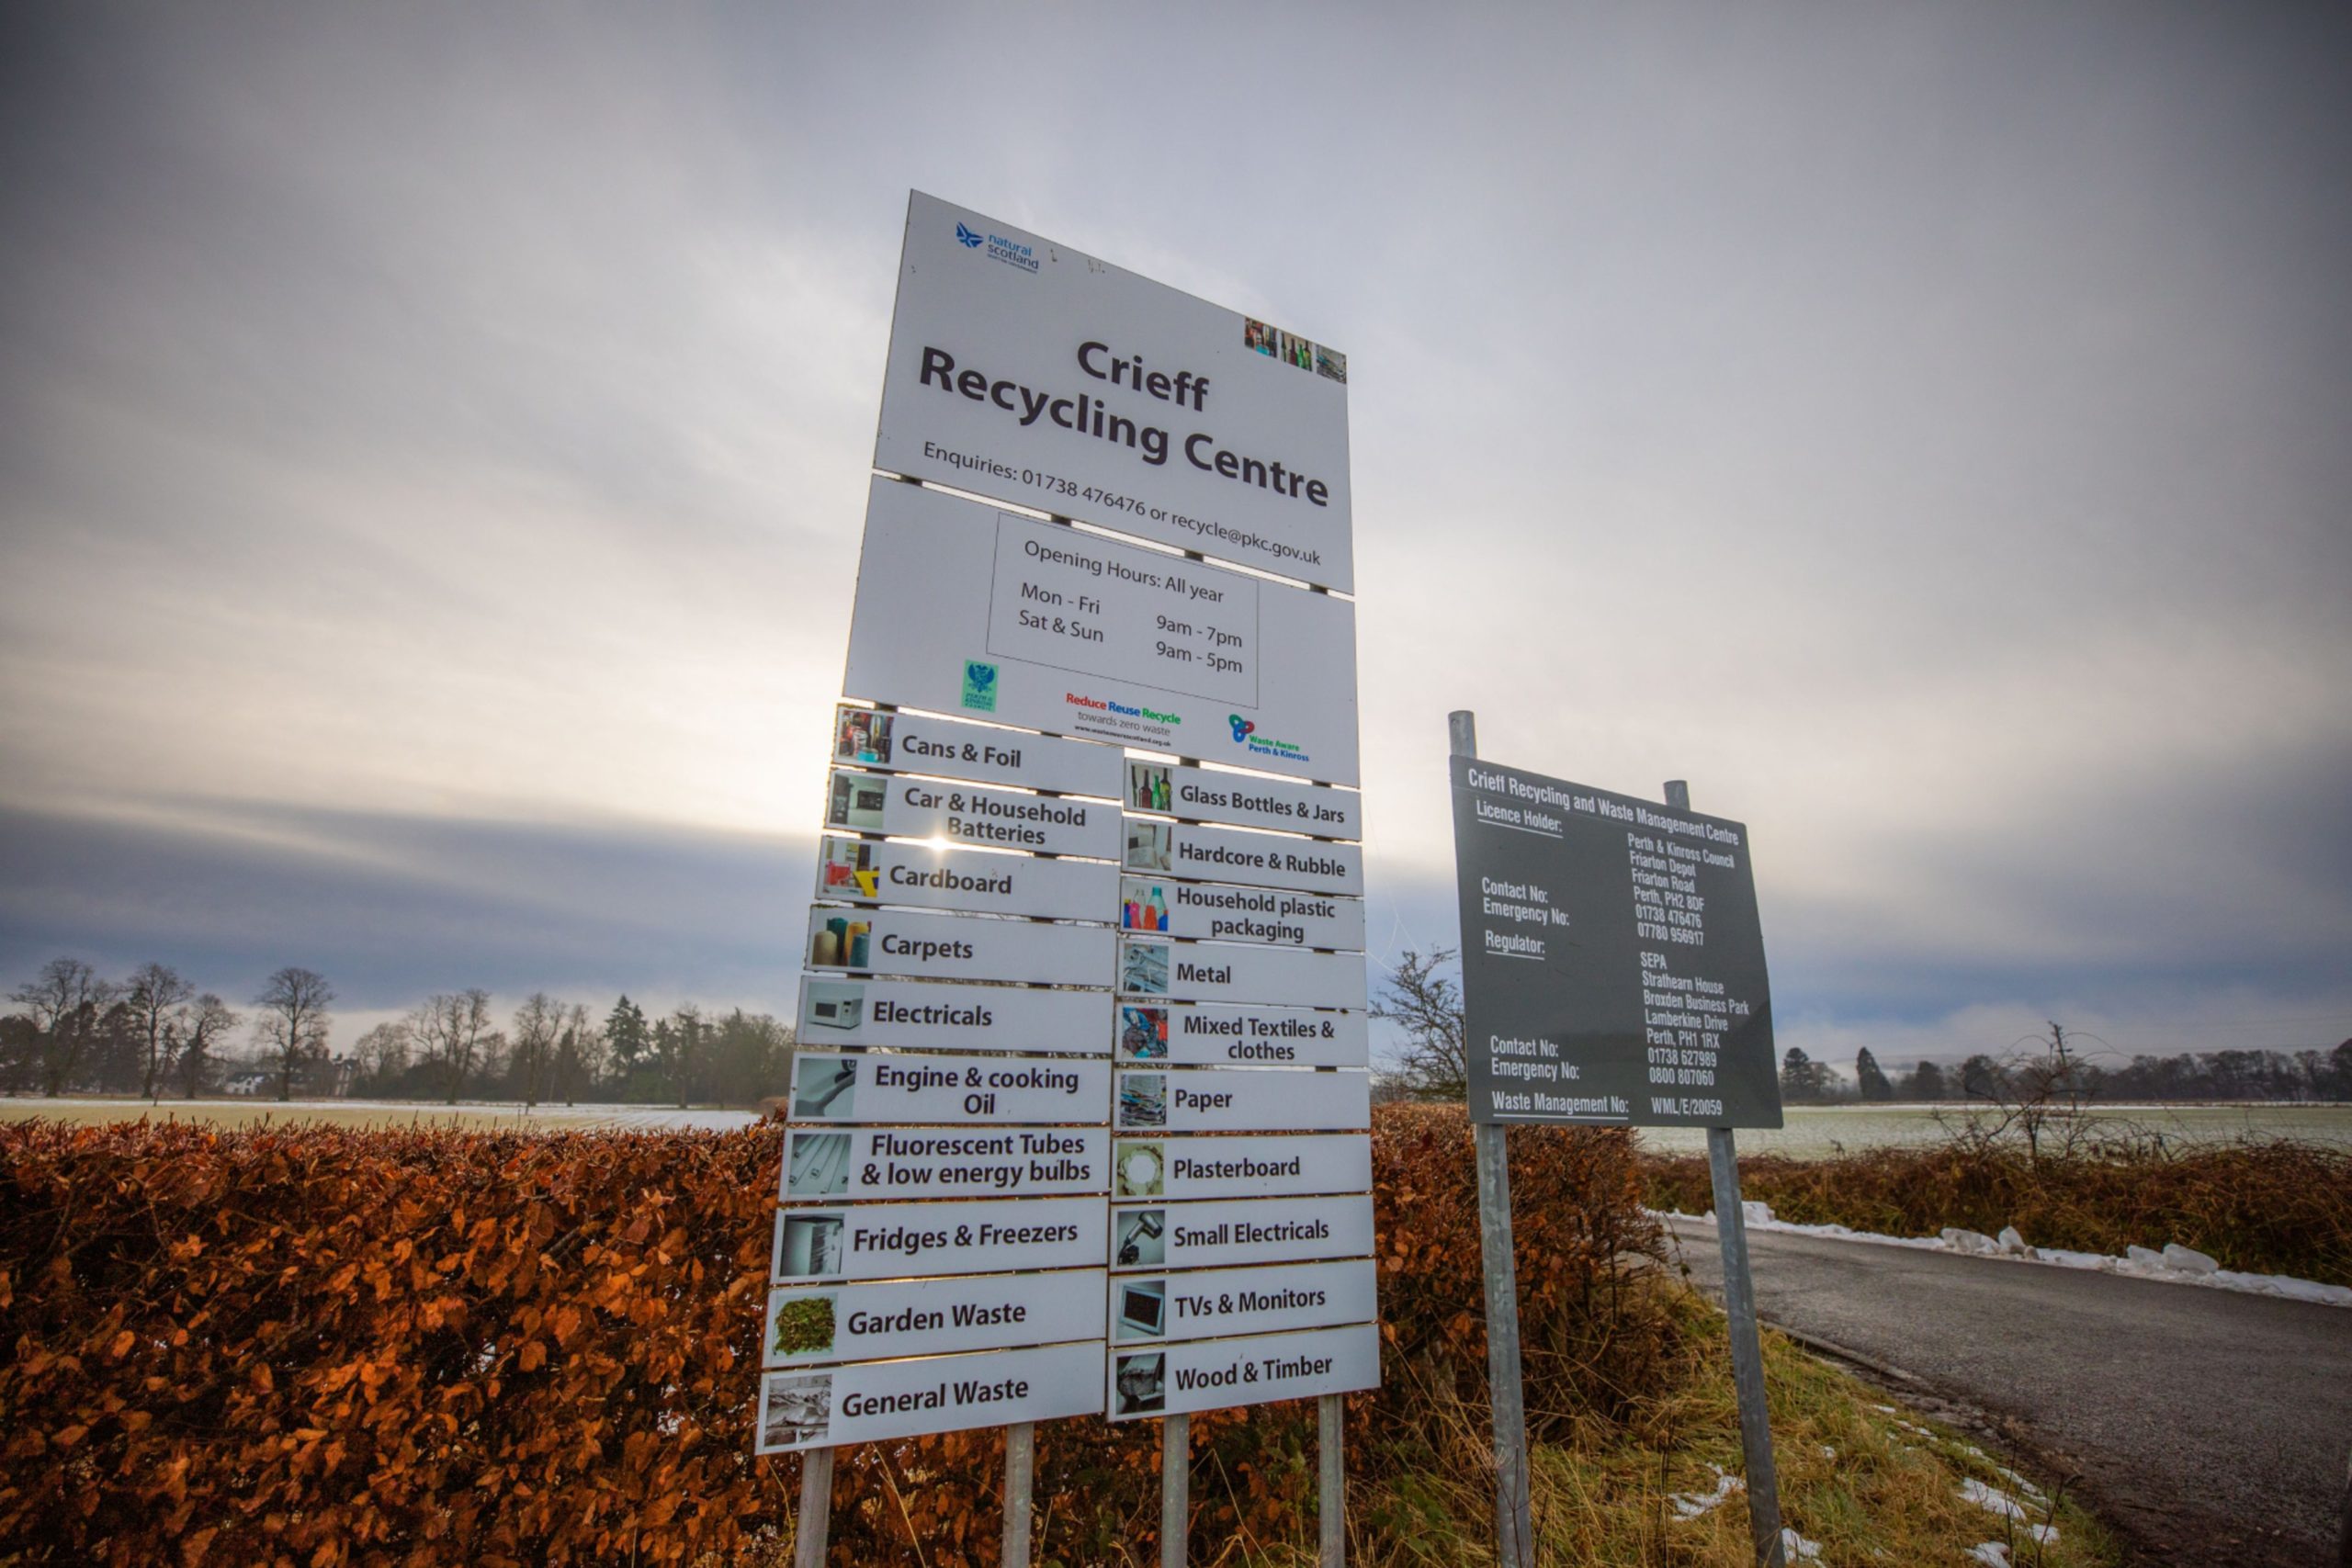 A sign for Crieff Recycling Centre